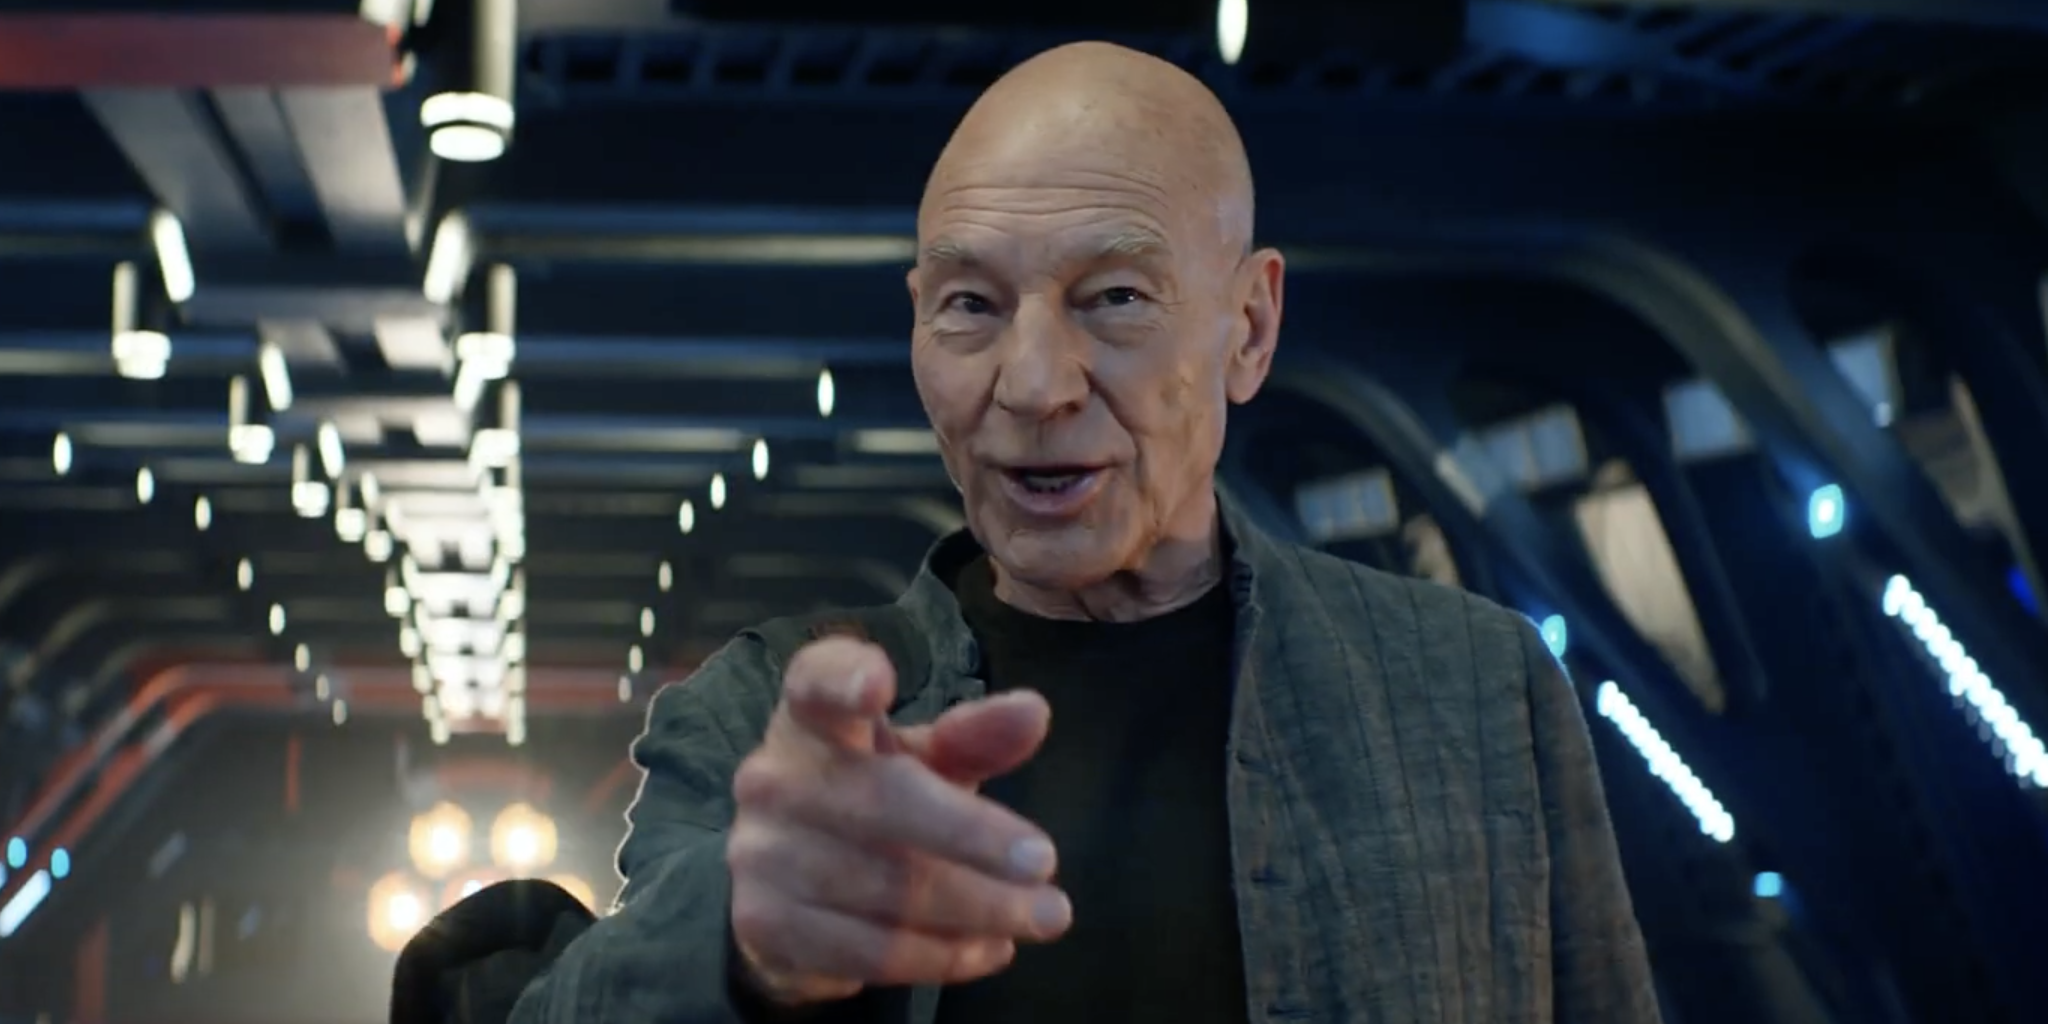 Star Trek: Picard will "shake the character up" in major ways